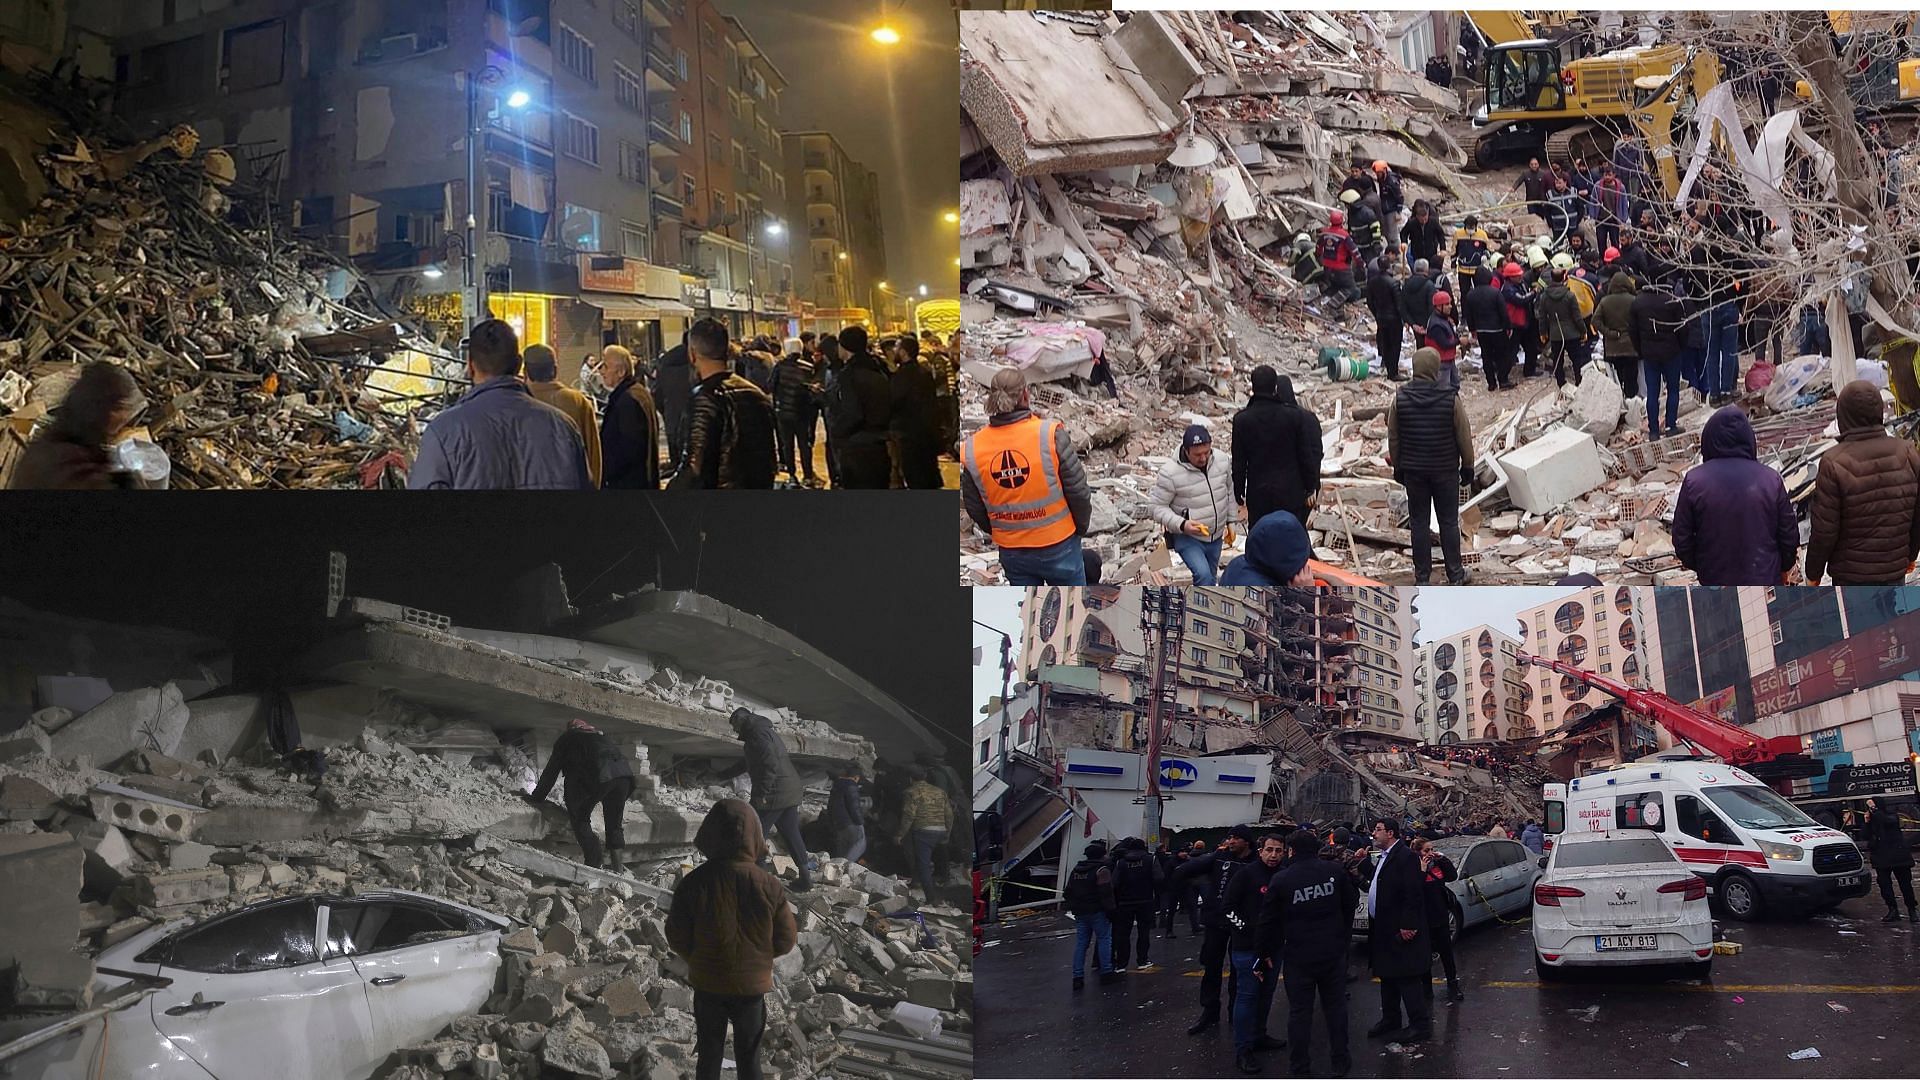 <div class="paragraphs"><p><a href="https://www.thequint.com/news/world/turkey-earthquake-southeastern-province-death-toll-casualties-magnitude">More than 1,300 people have been killed</a> and at least 6,000 have been injured in Turkey and Syria after the earthquake toppled hundreds of buildings.</p></div>